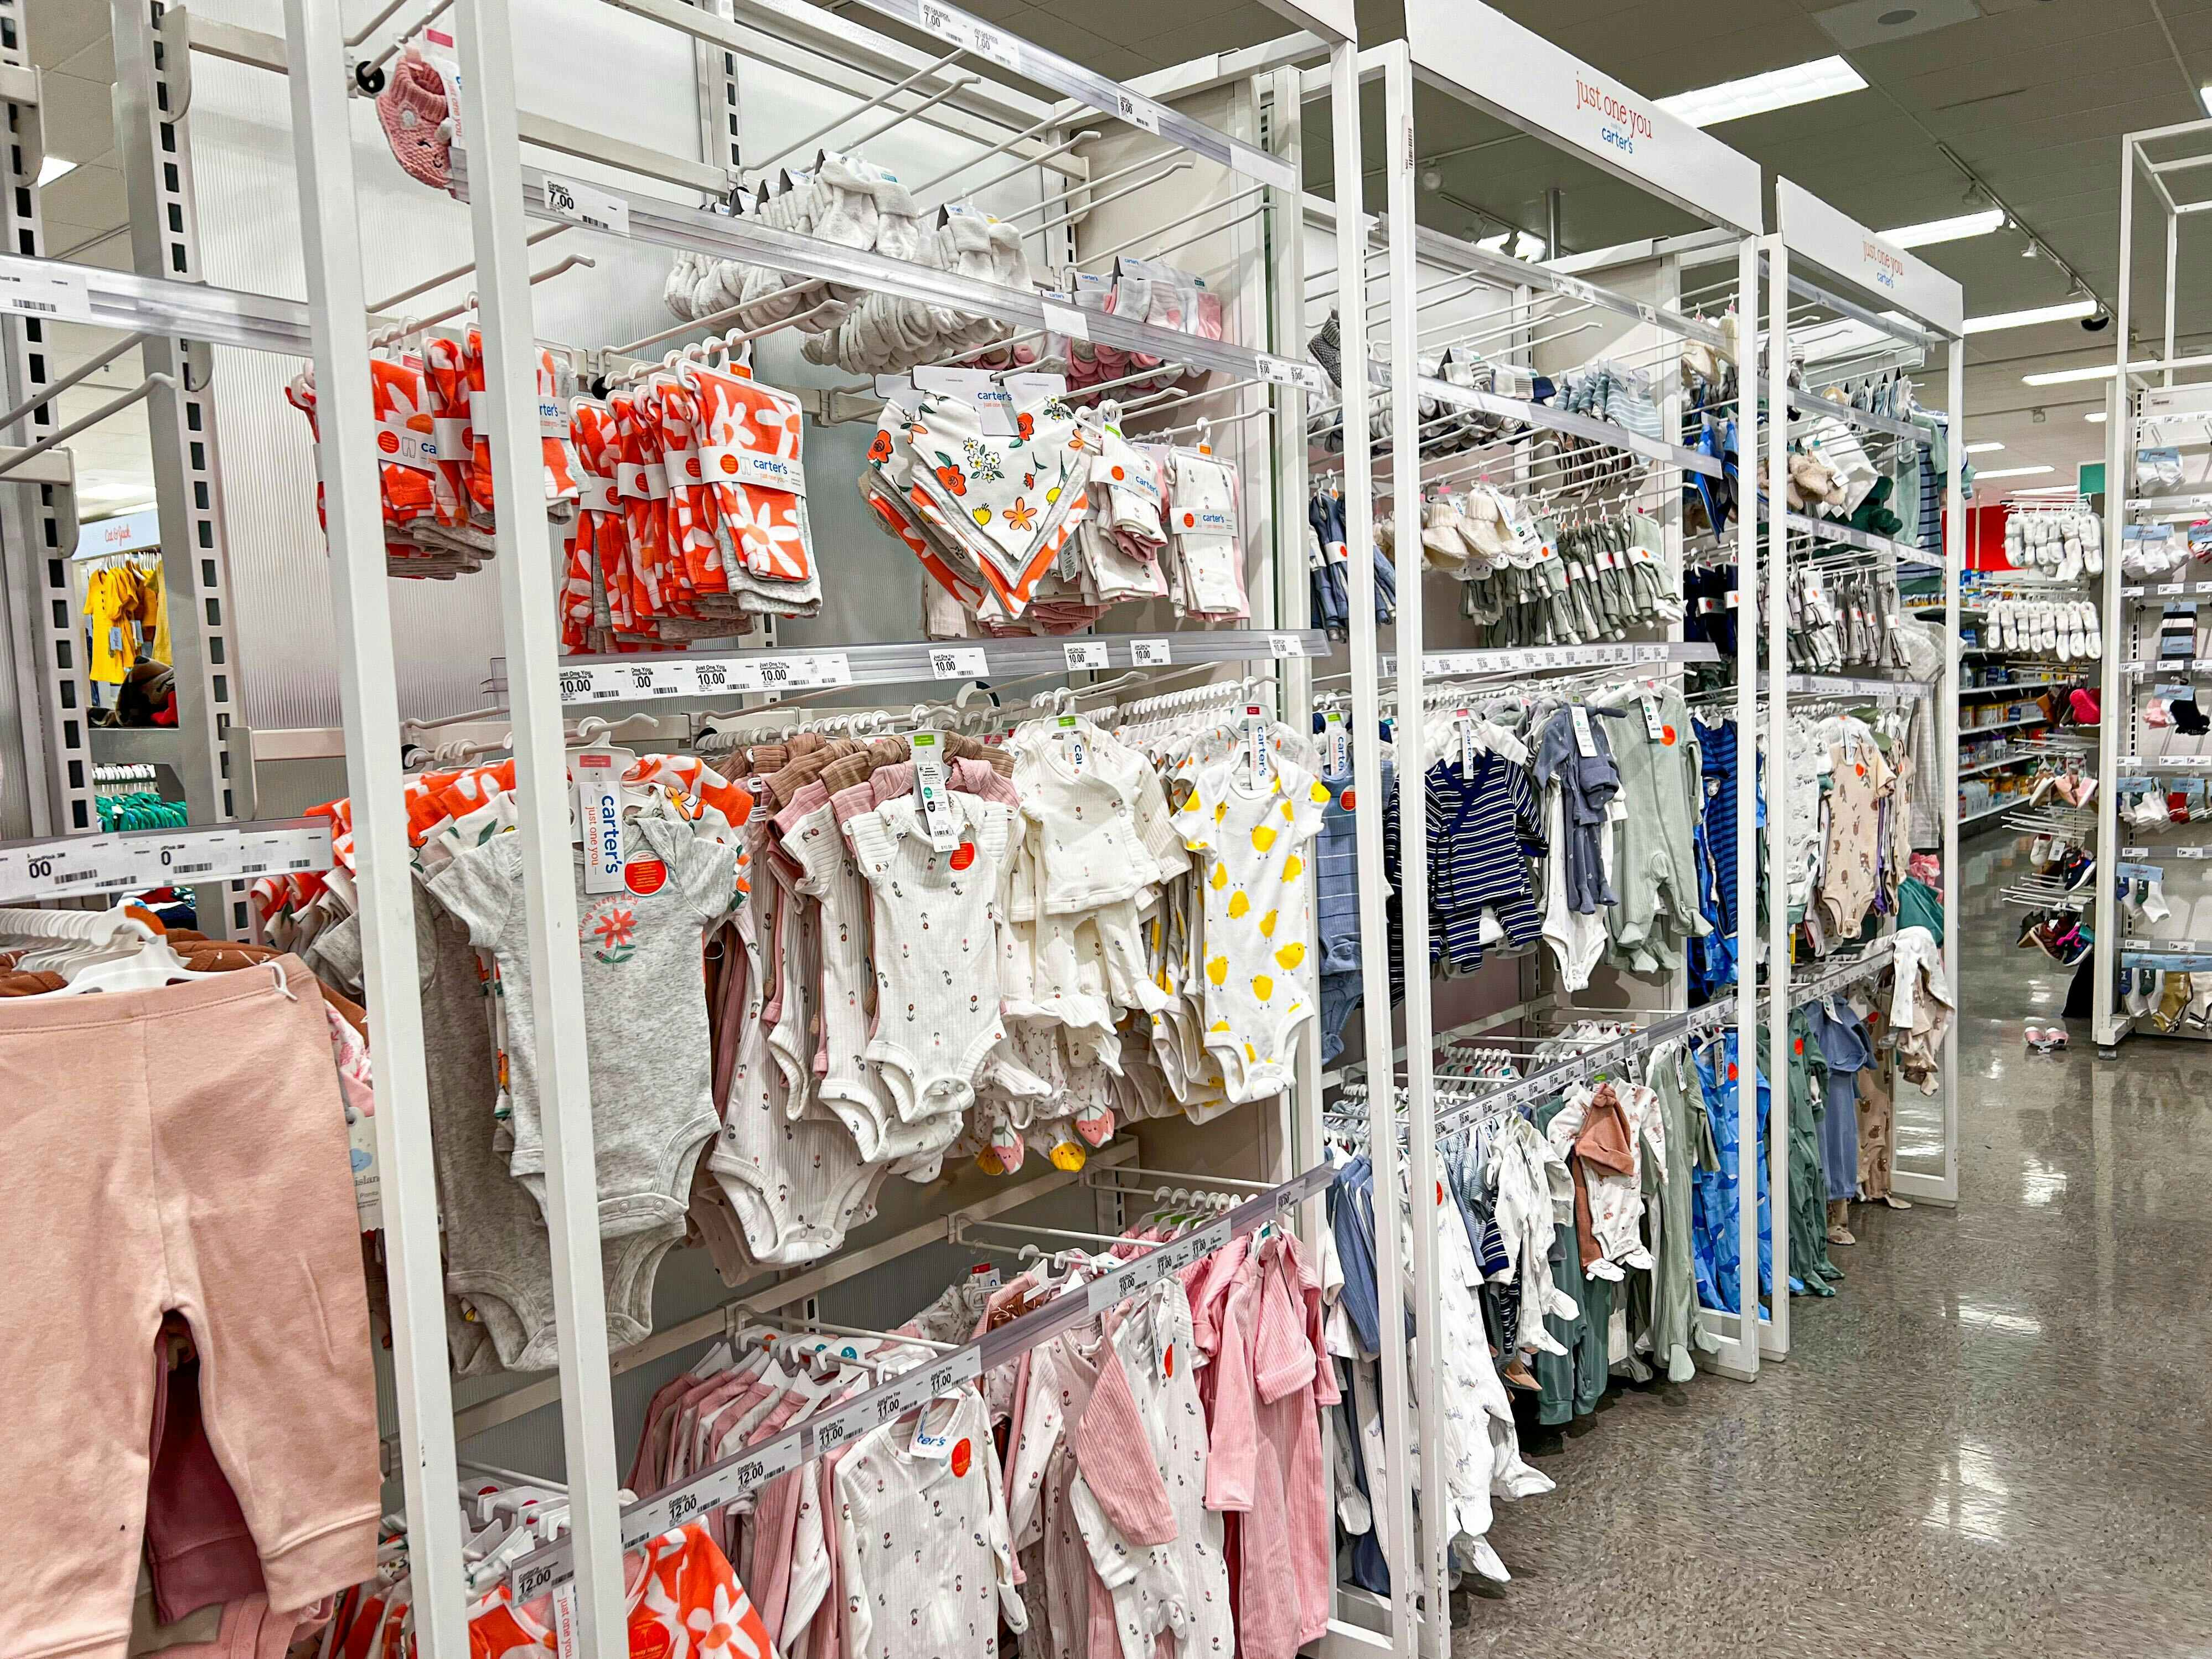 Carter's Little Planet Apparel on Clearance — 50% Off at Target